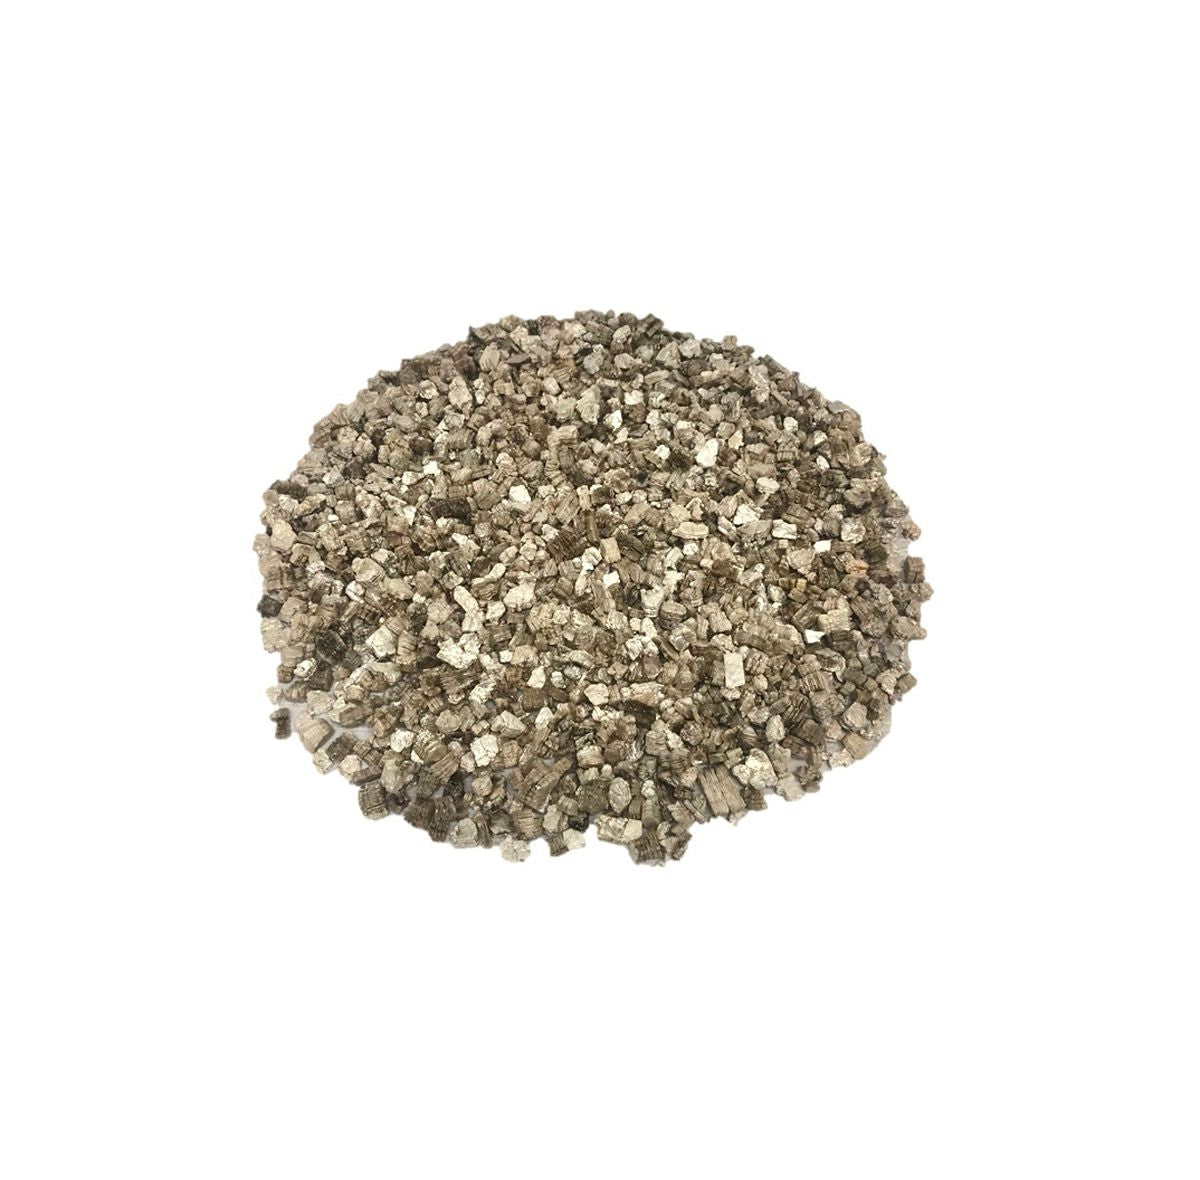 Enhance A Fire 12 Oz. Natural Sea Designer Vermiculite for Indoor Vented Gas Logs and Fireplace